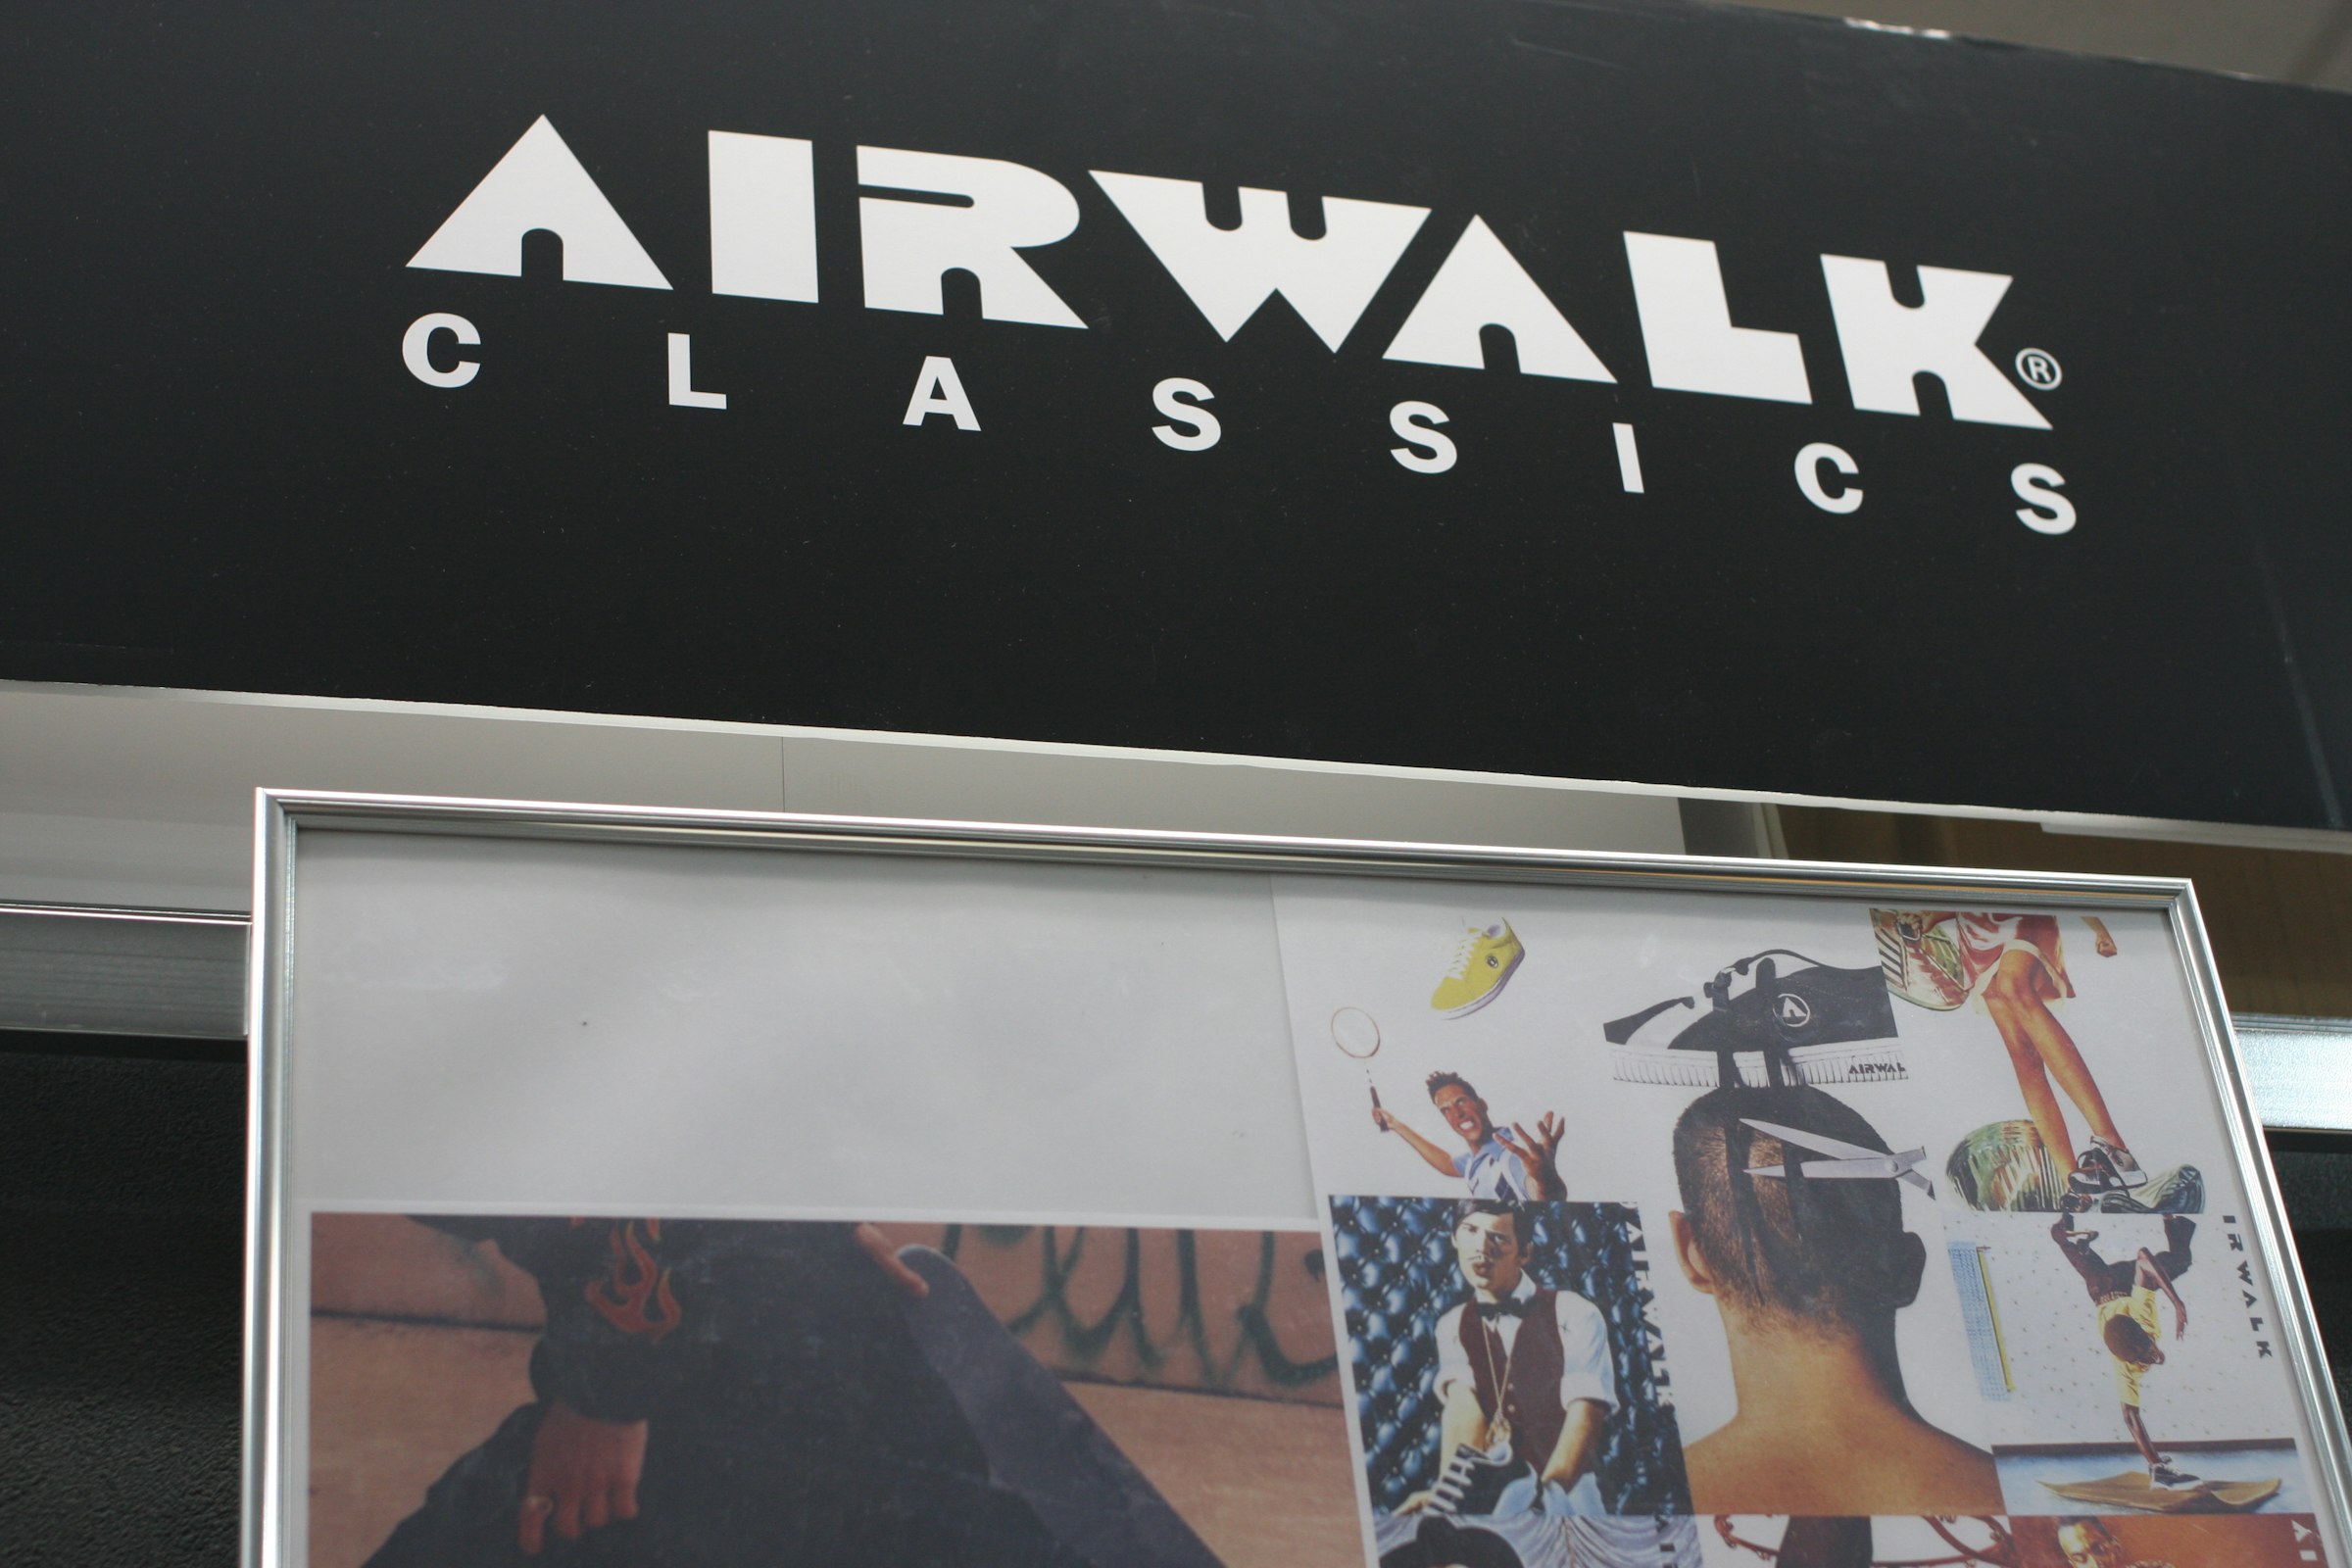 "AIRWALK CLASSICS," started in 2017 to introduce 'AIRWALK' archives